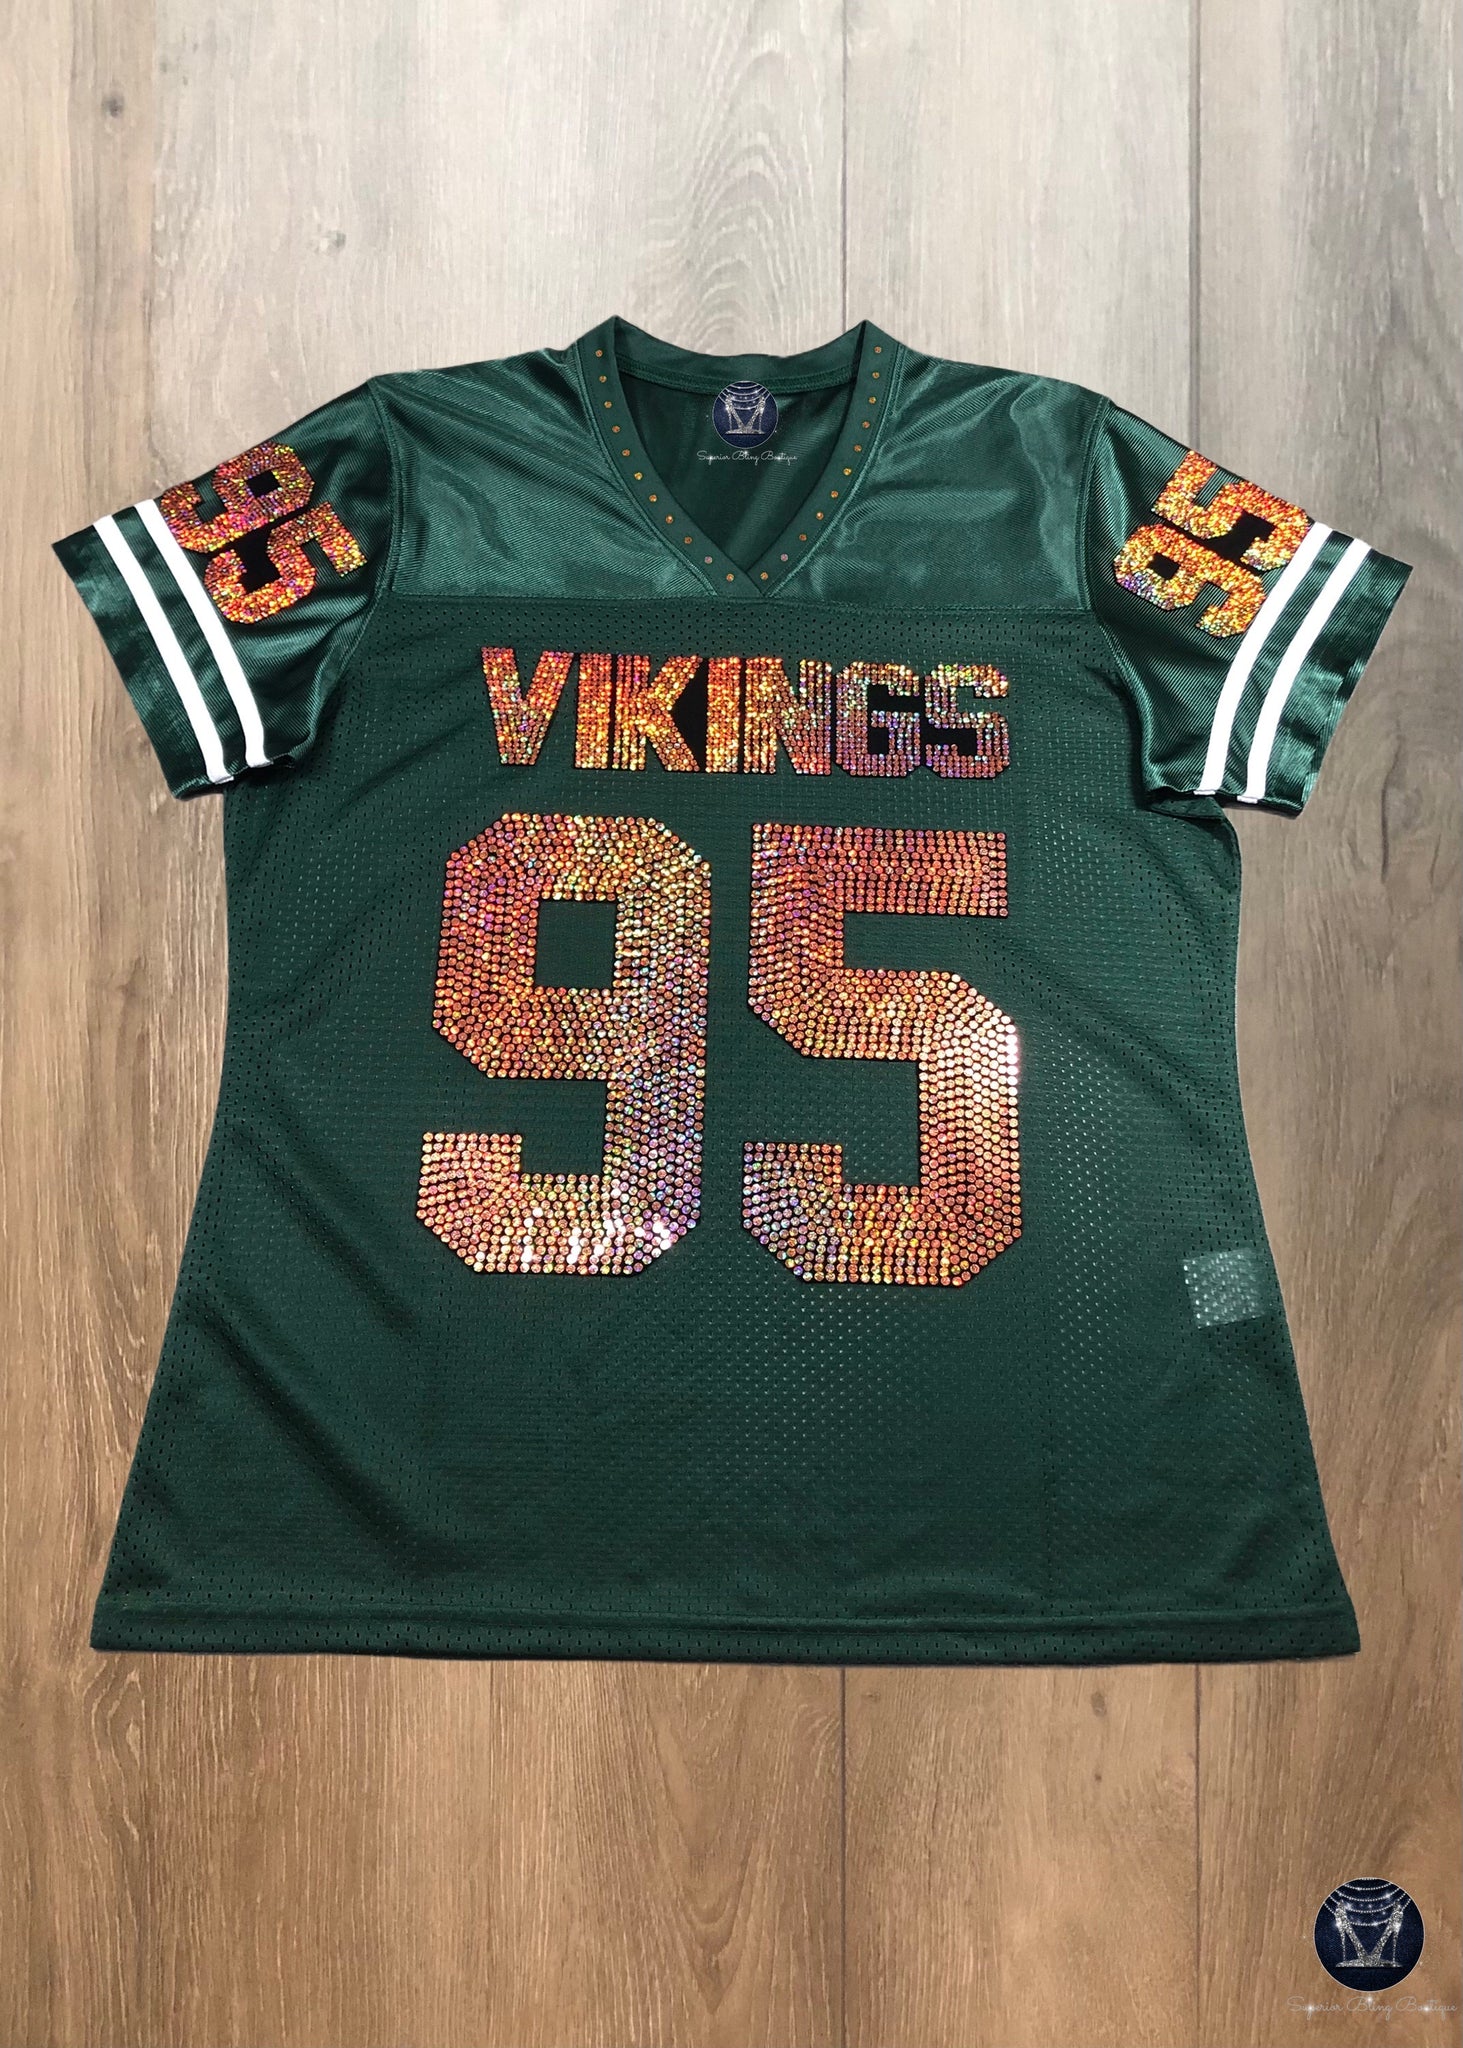 HHS Vikings Bling Ladies Patchwork Jersey - FRONT DESIGN ONLY